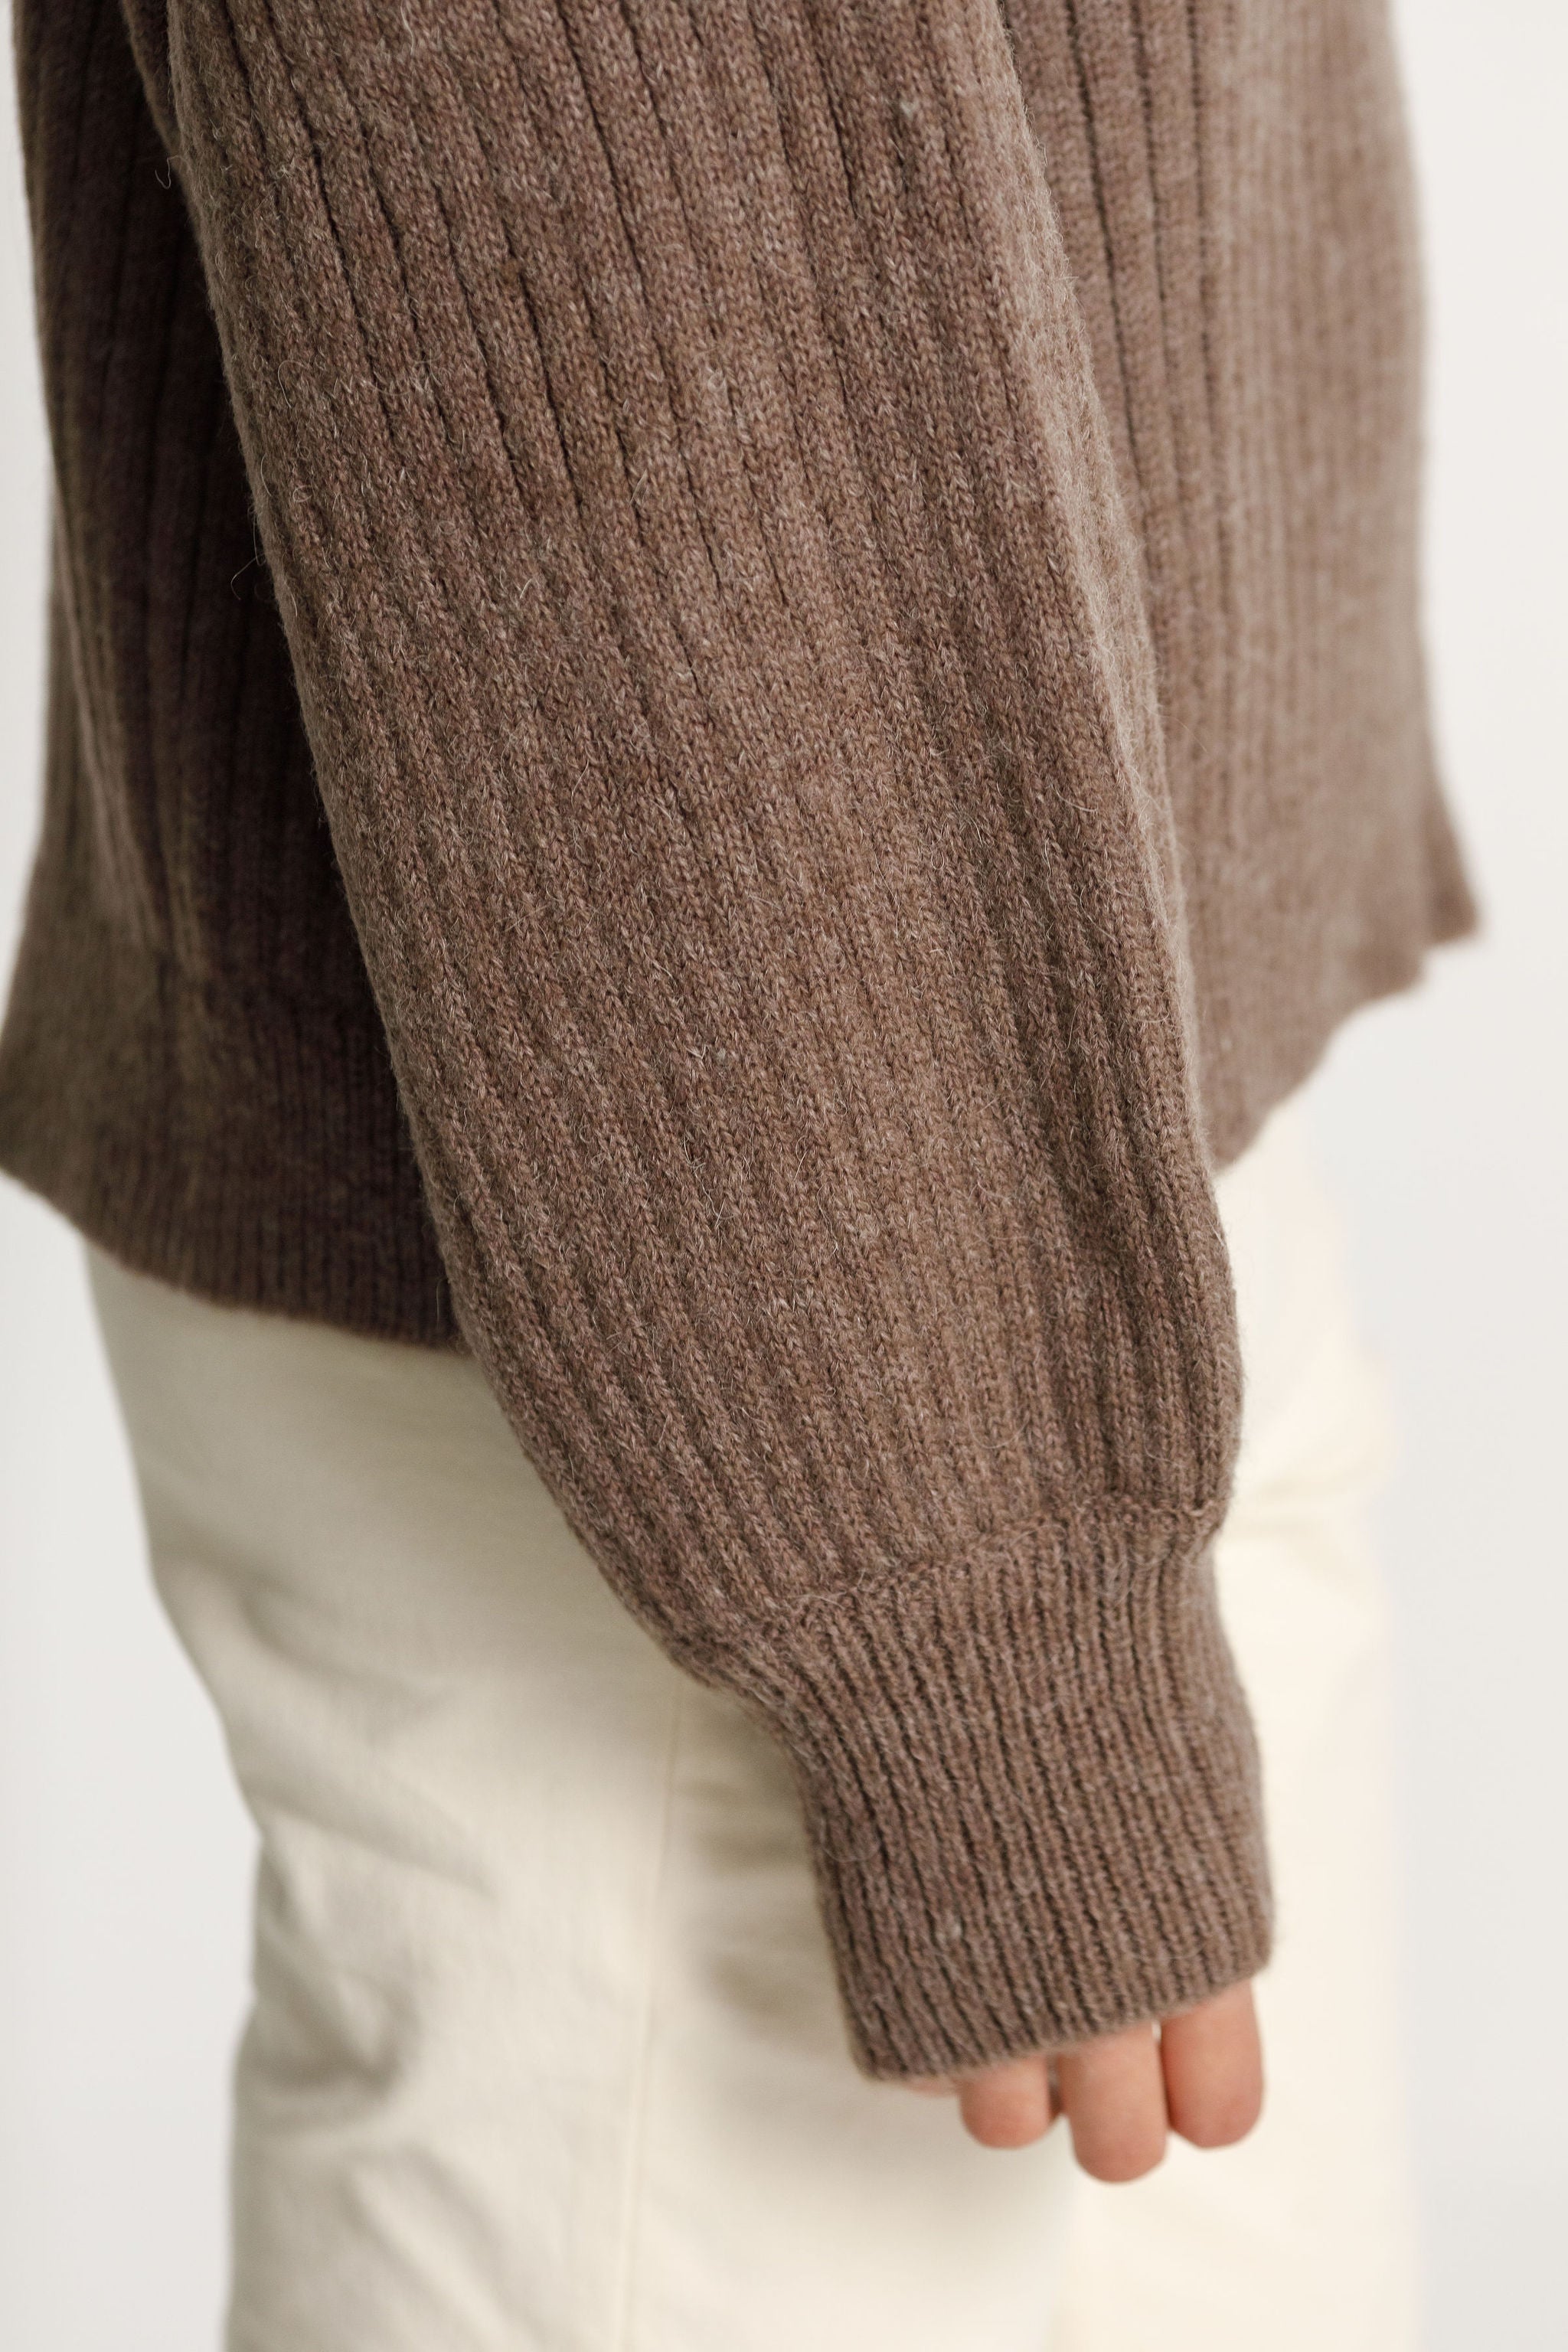 Emmie Knit - Sale - French Brown